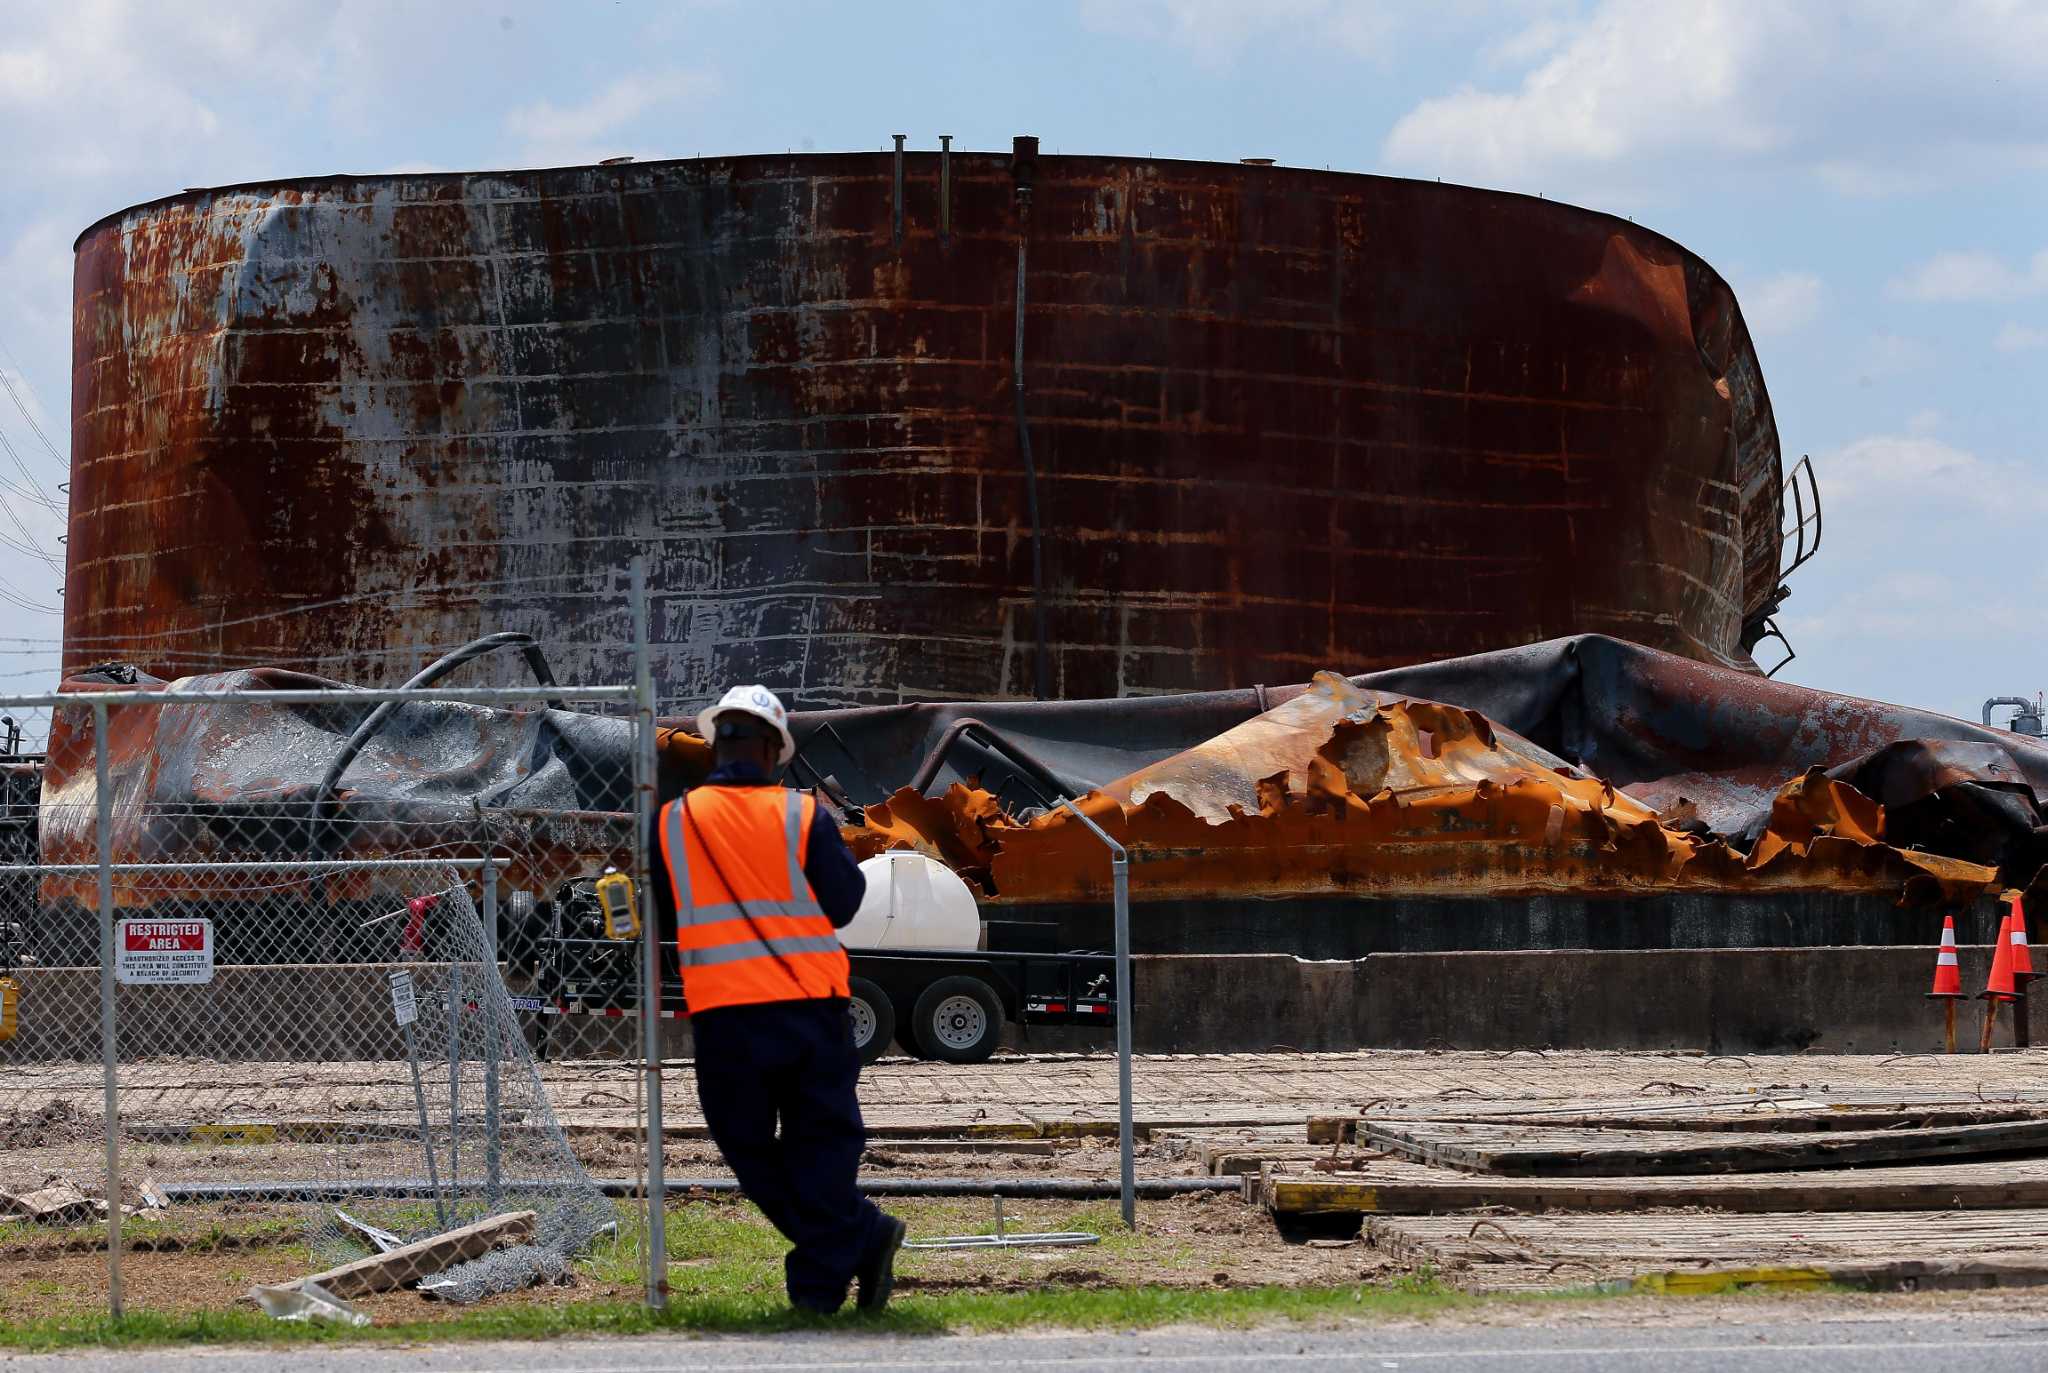 ITC owes $6.6 million for environmental harm from 2019 tank fire